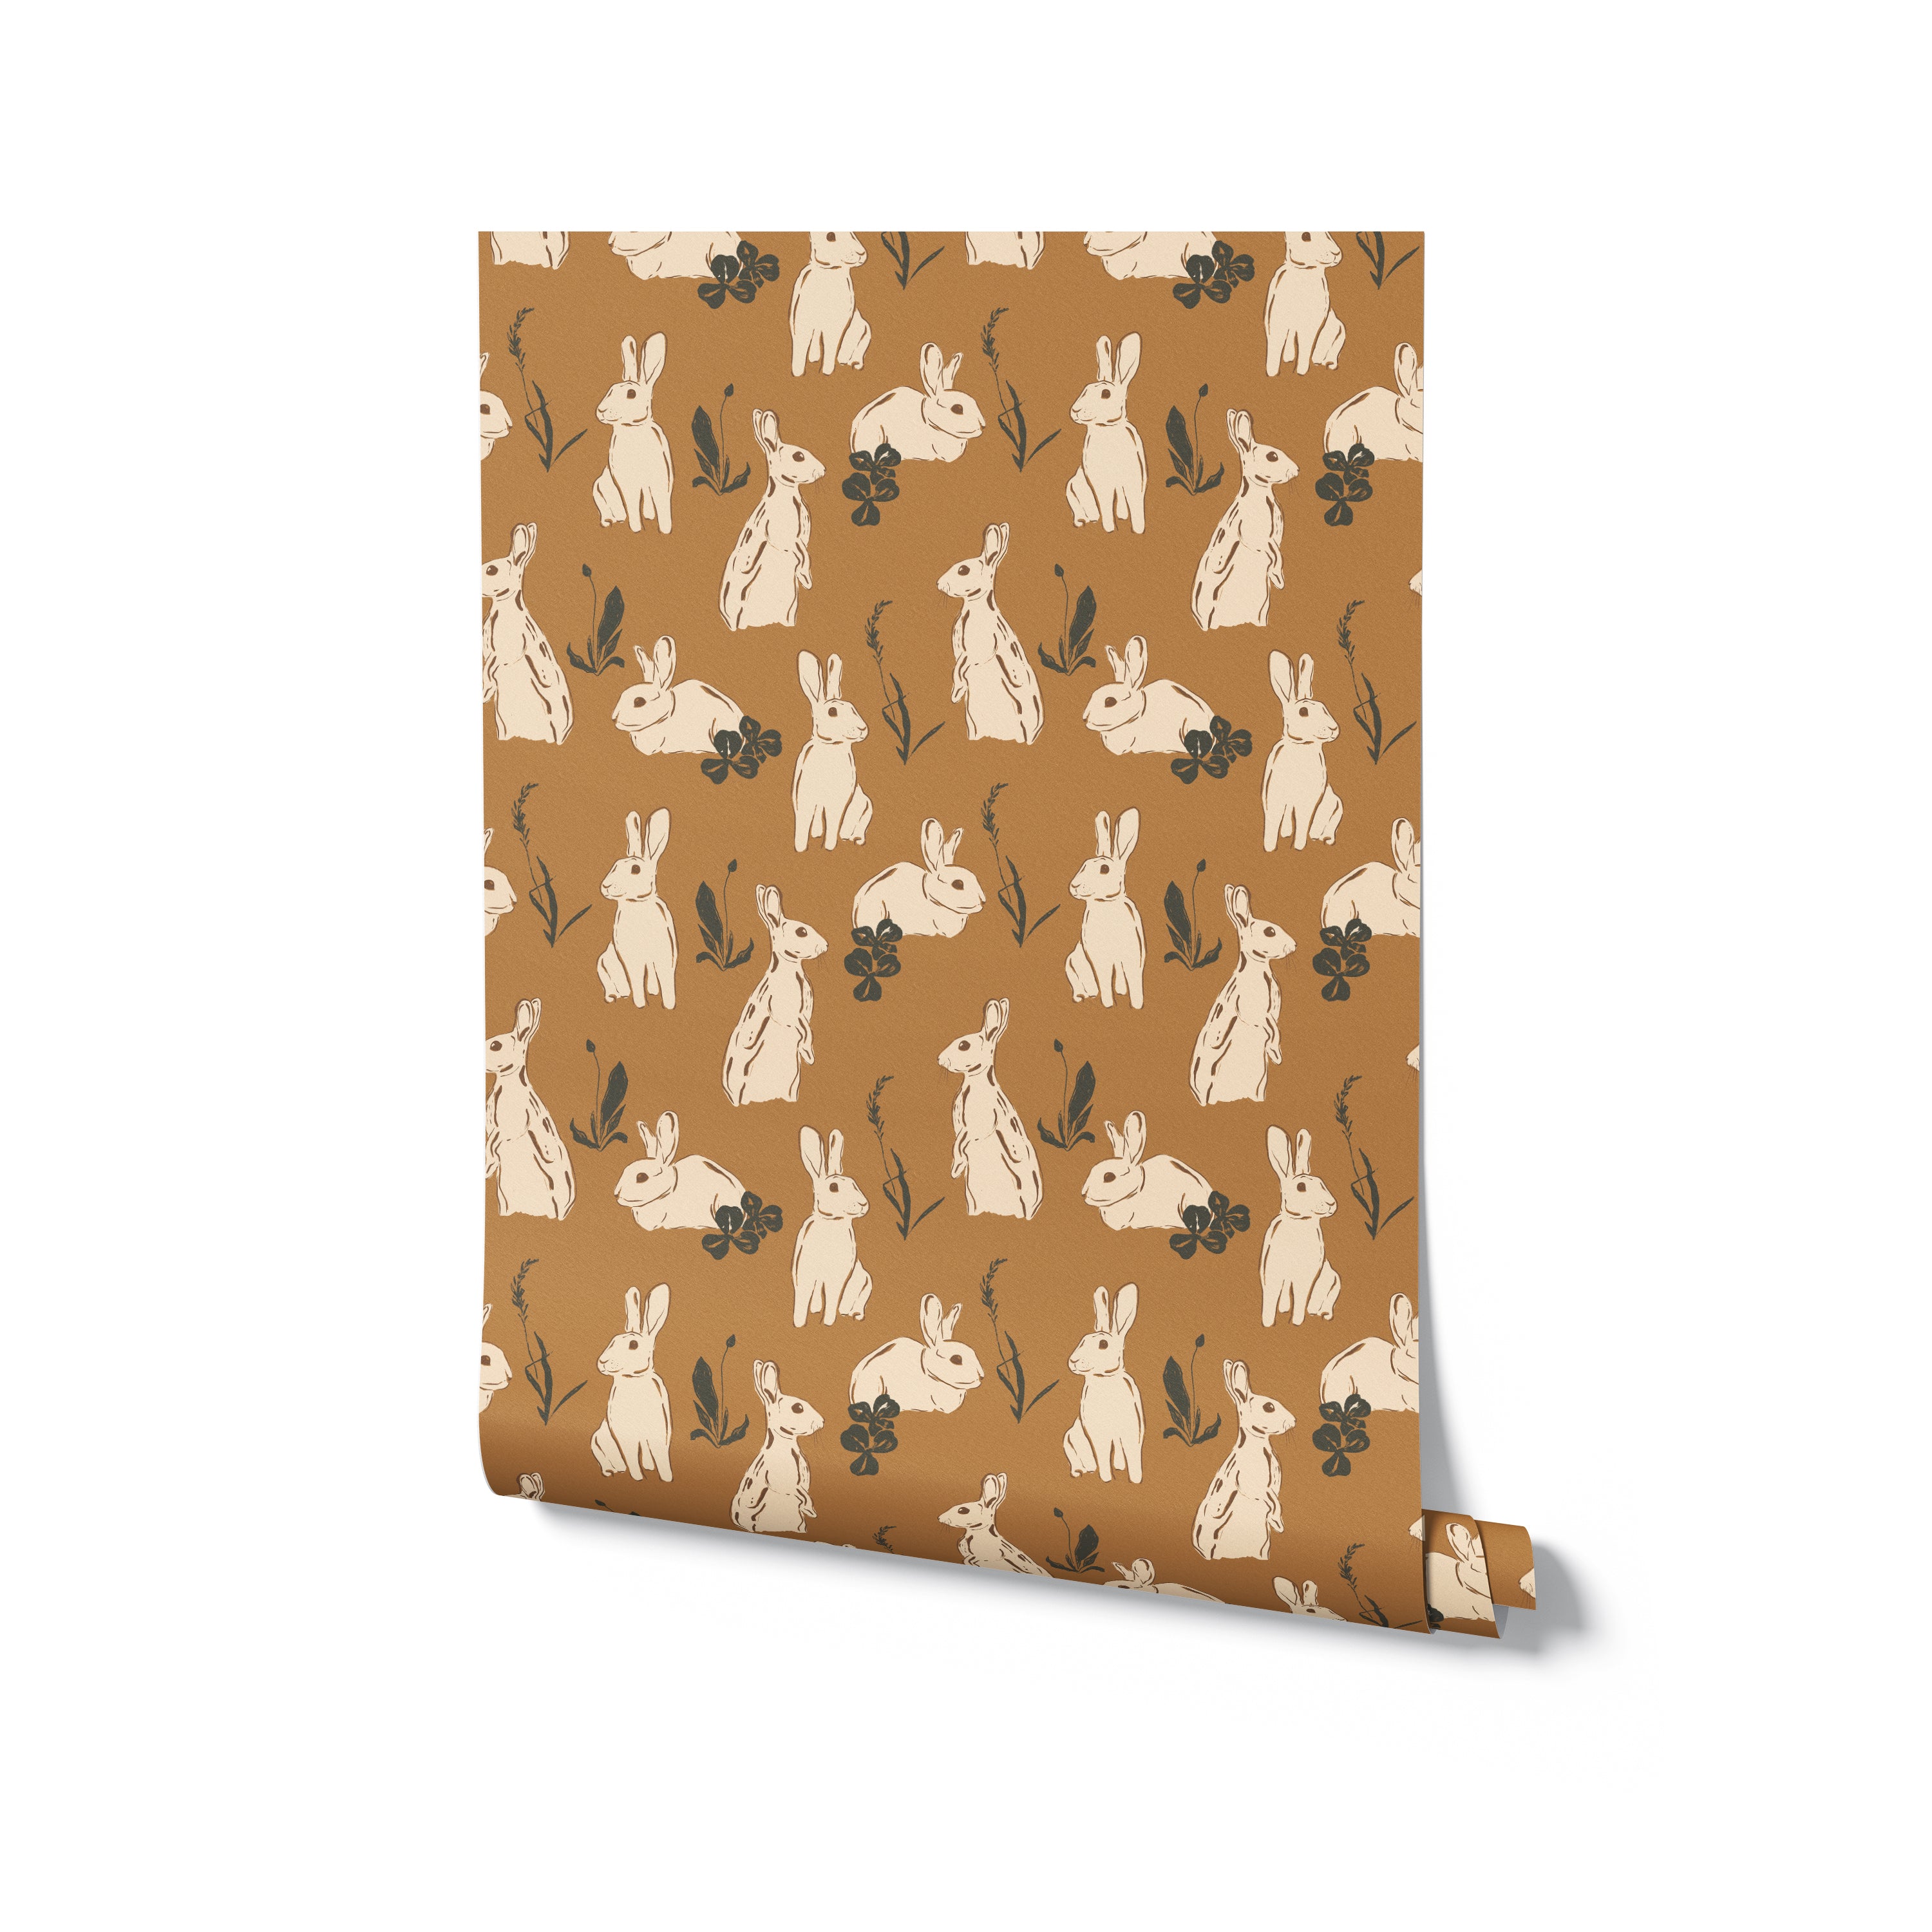 A roll of enchanting rabbit-themed wallpaper in a beige and cream color scheme, showcasing a playful and elegant pattern ideal for a whimsical room makeover